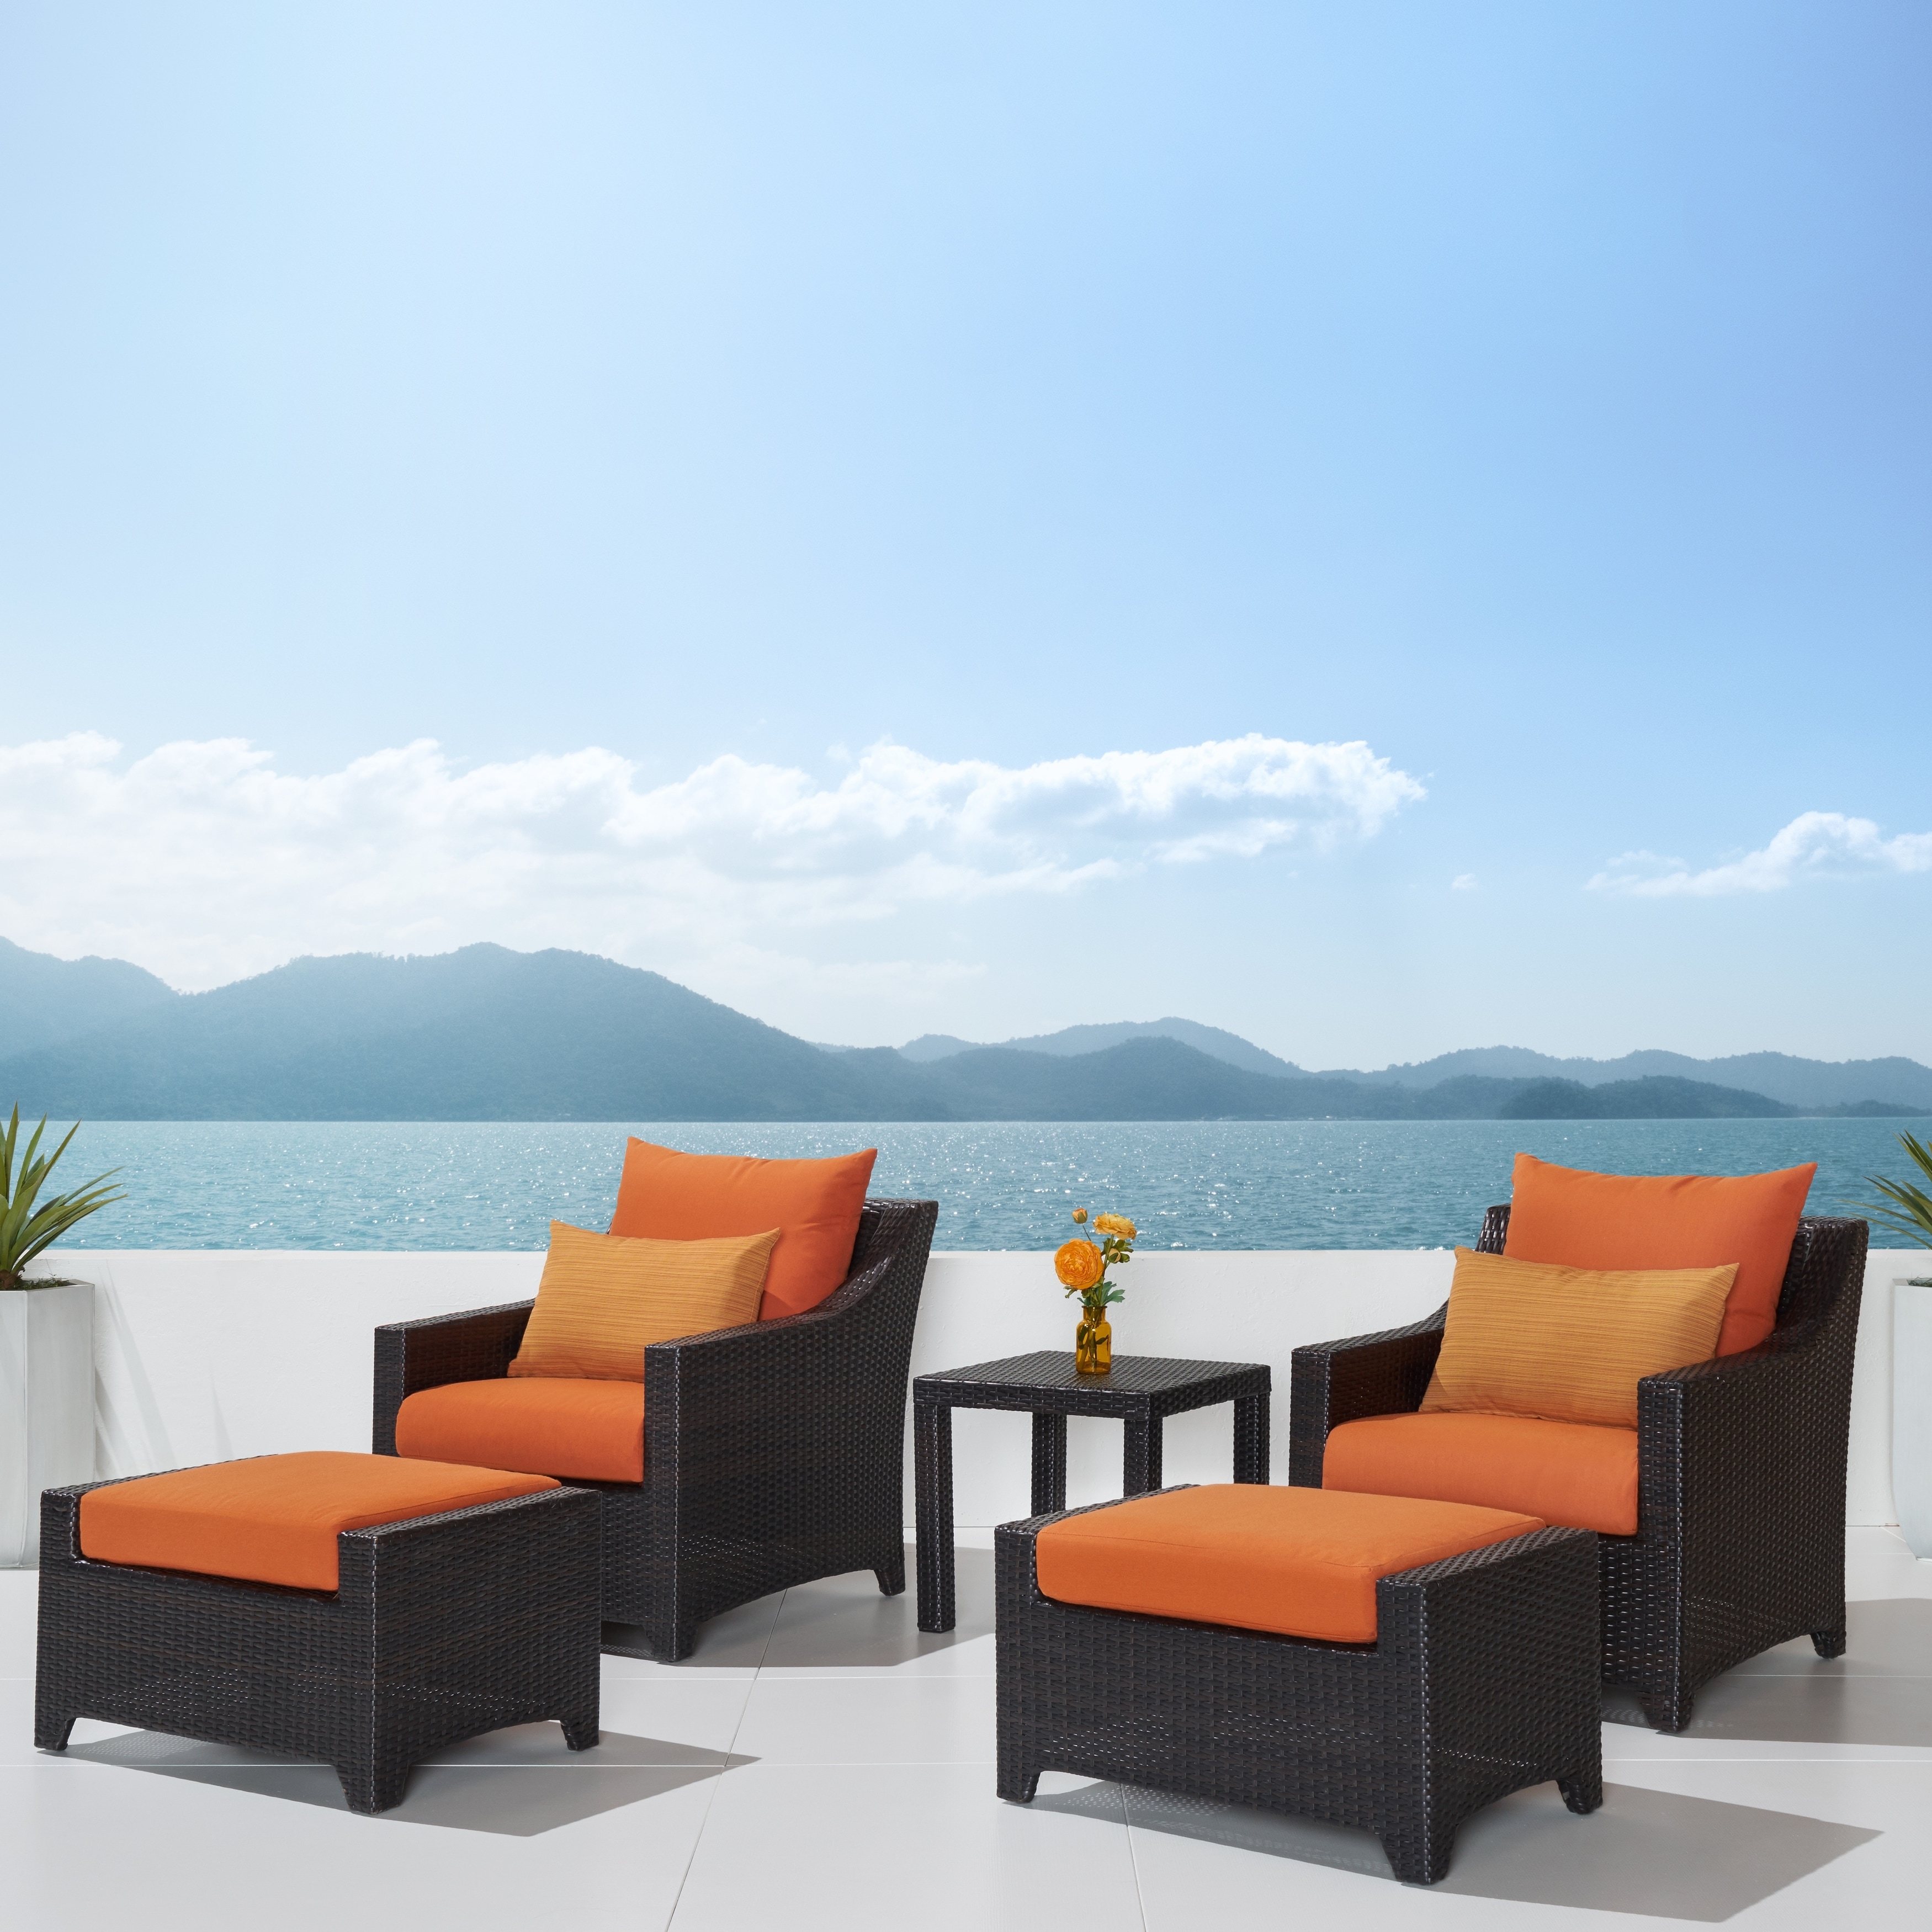 RST Outdoor Tikka 5 Piece Patio Club Chairs and Ottomans Set Compare